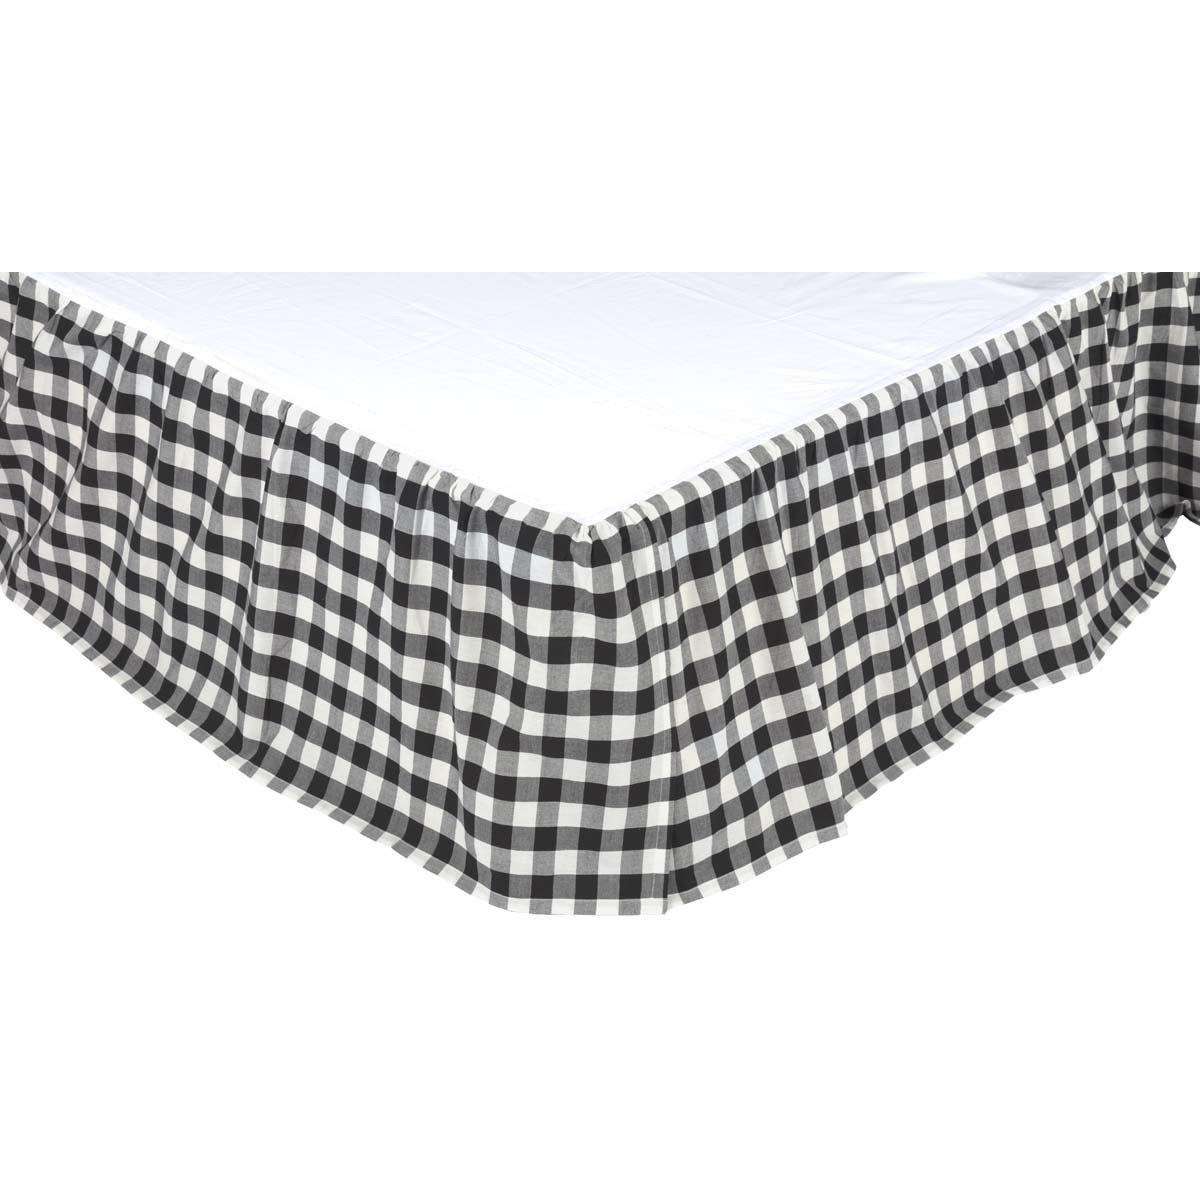 Annie Buffalo Black Check Bed Skirts VHC Brands - The Fox Decor